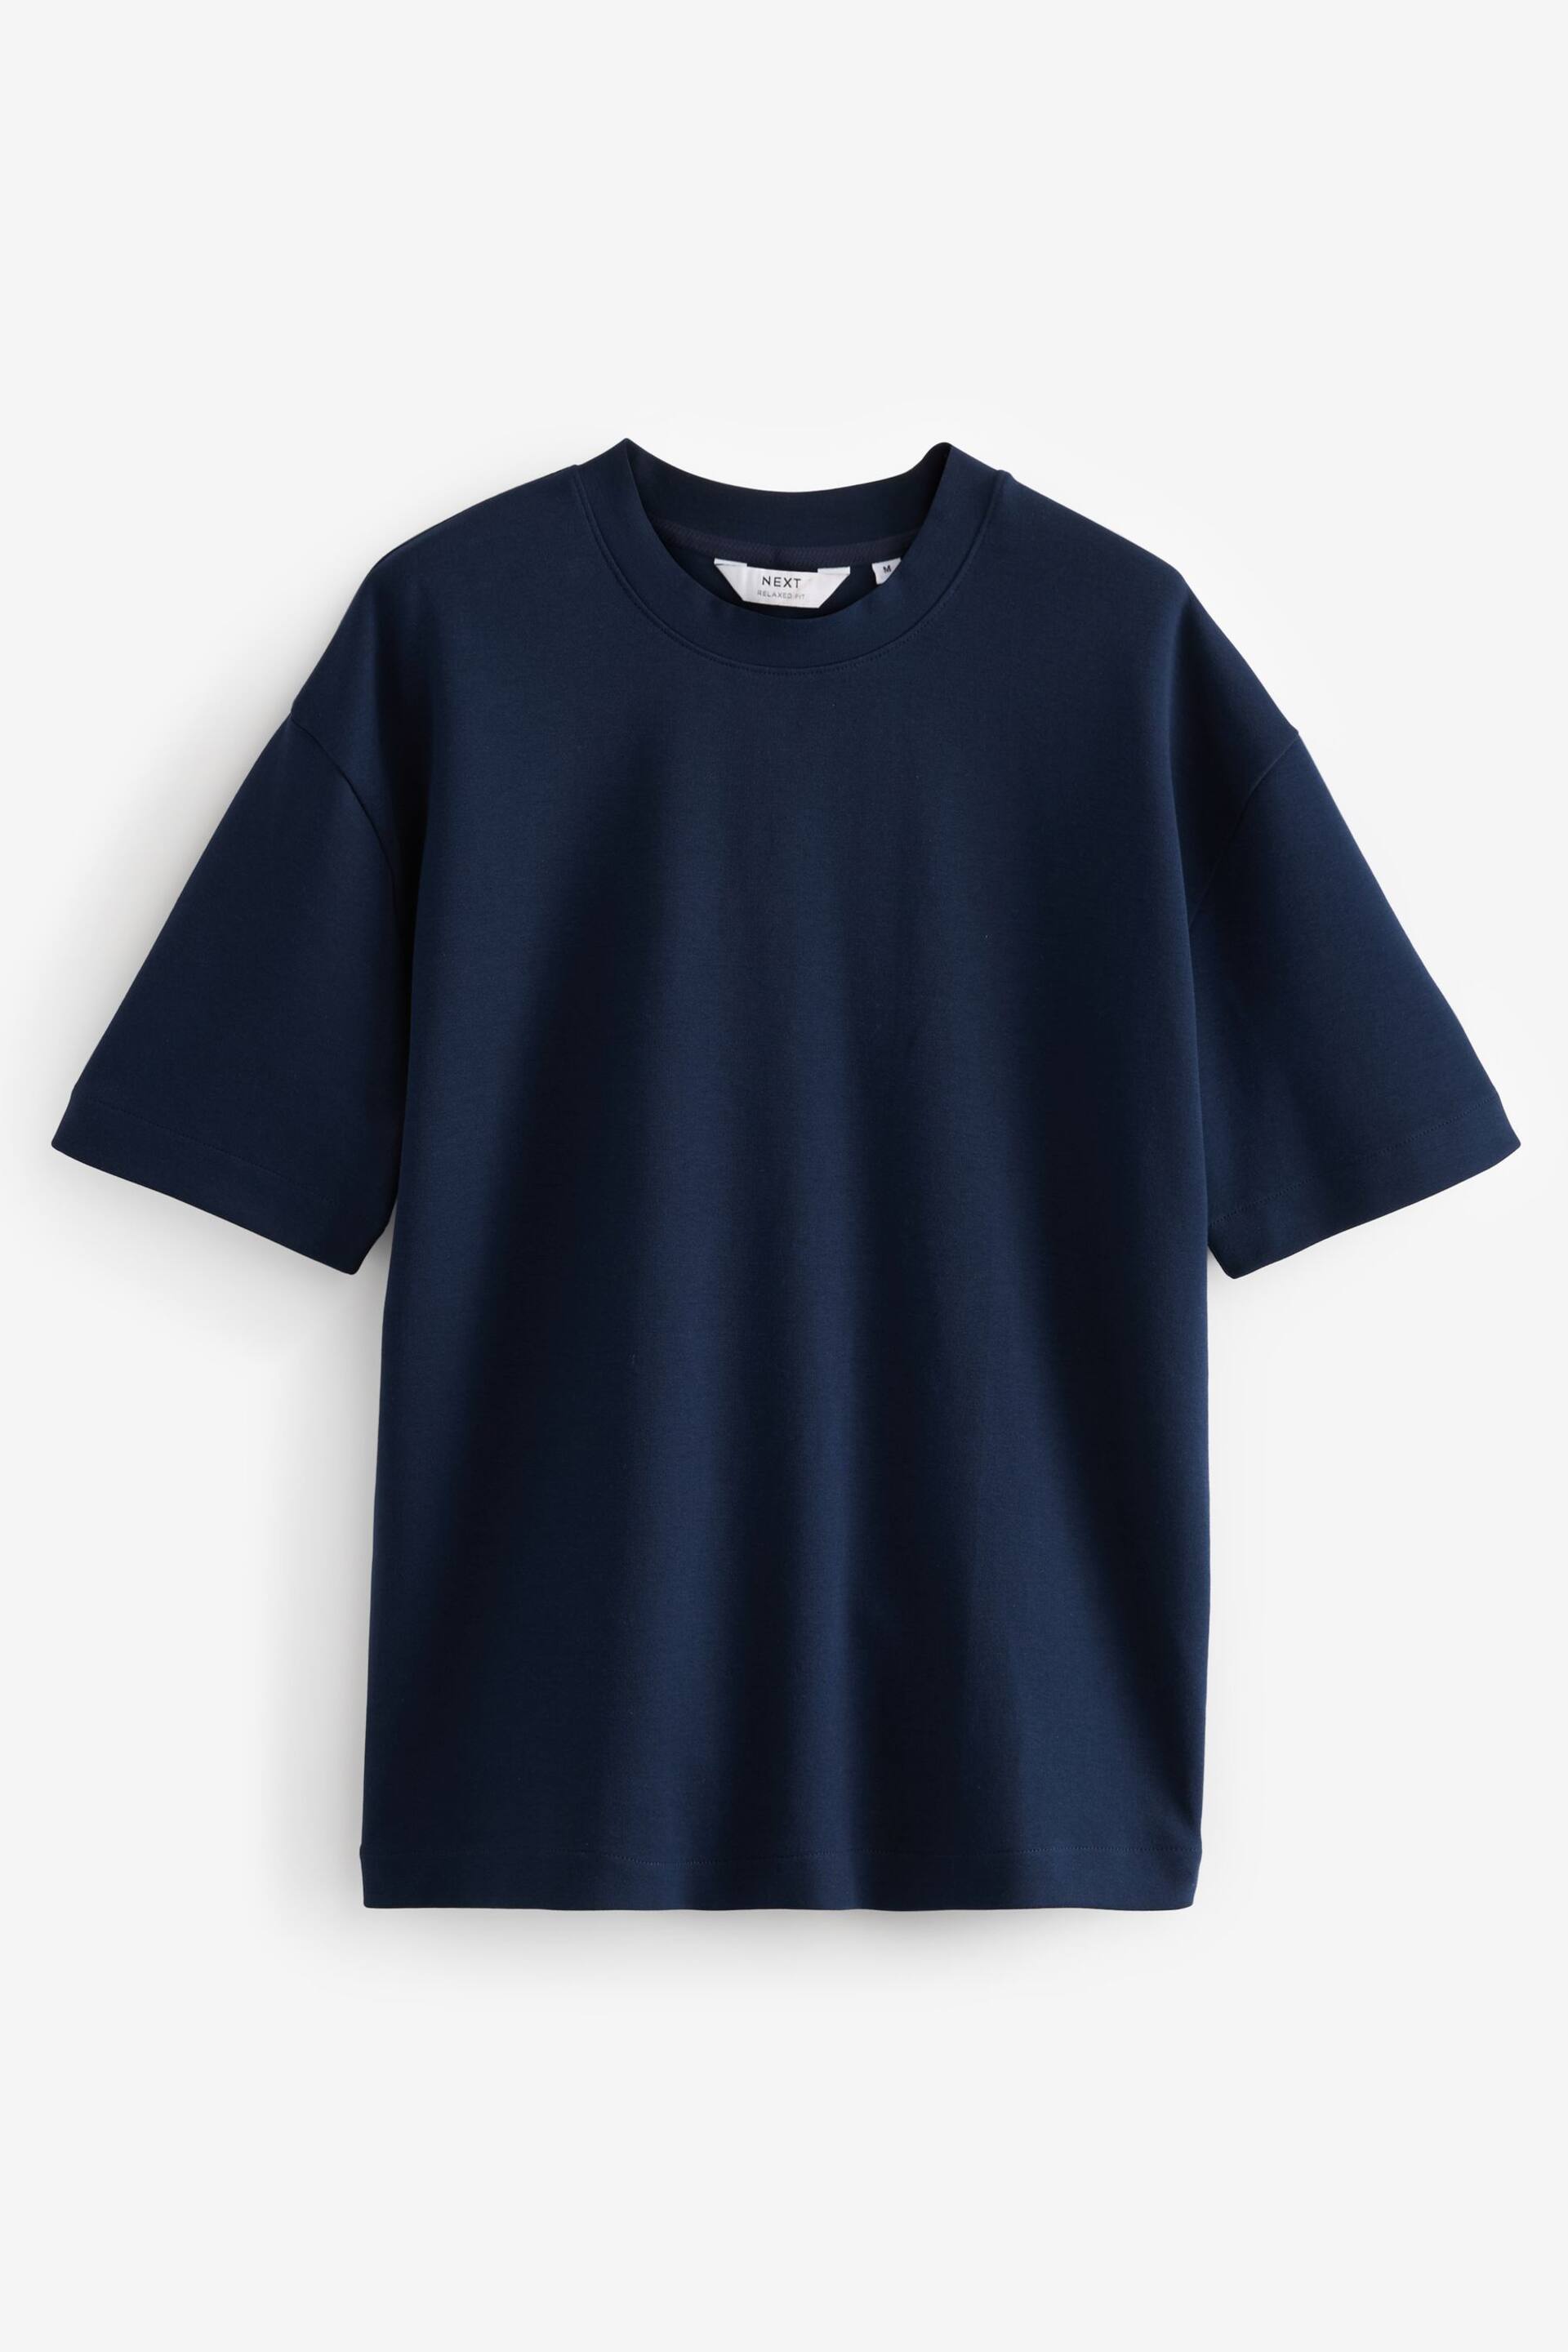 Navy Blue Relaxed Fit Soft Touch Heavyweight T-Shirt - Image 5 of 7